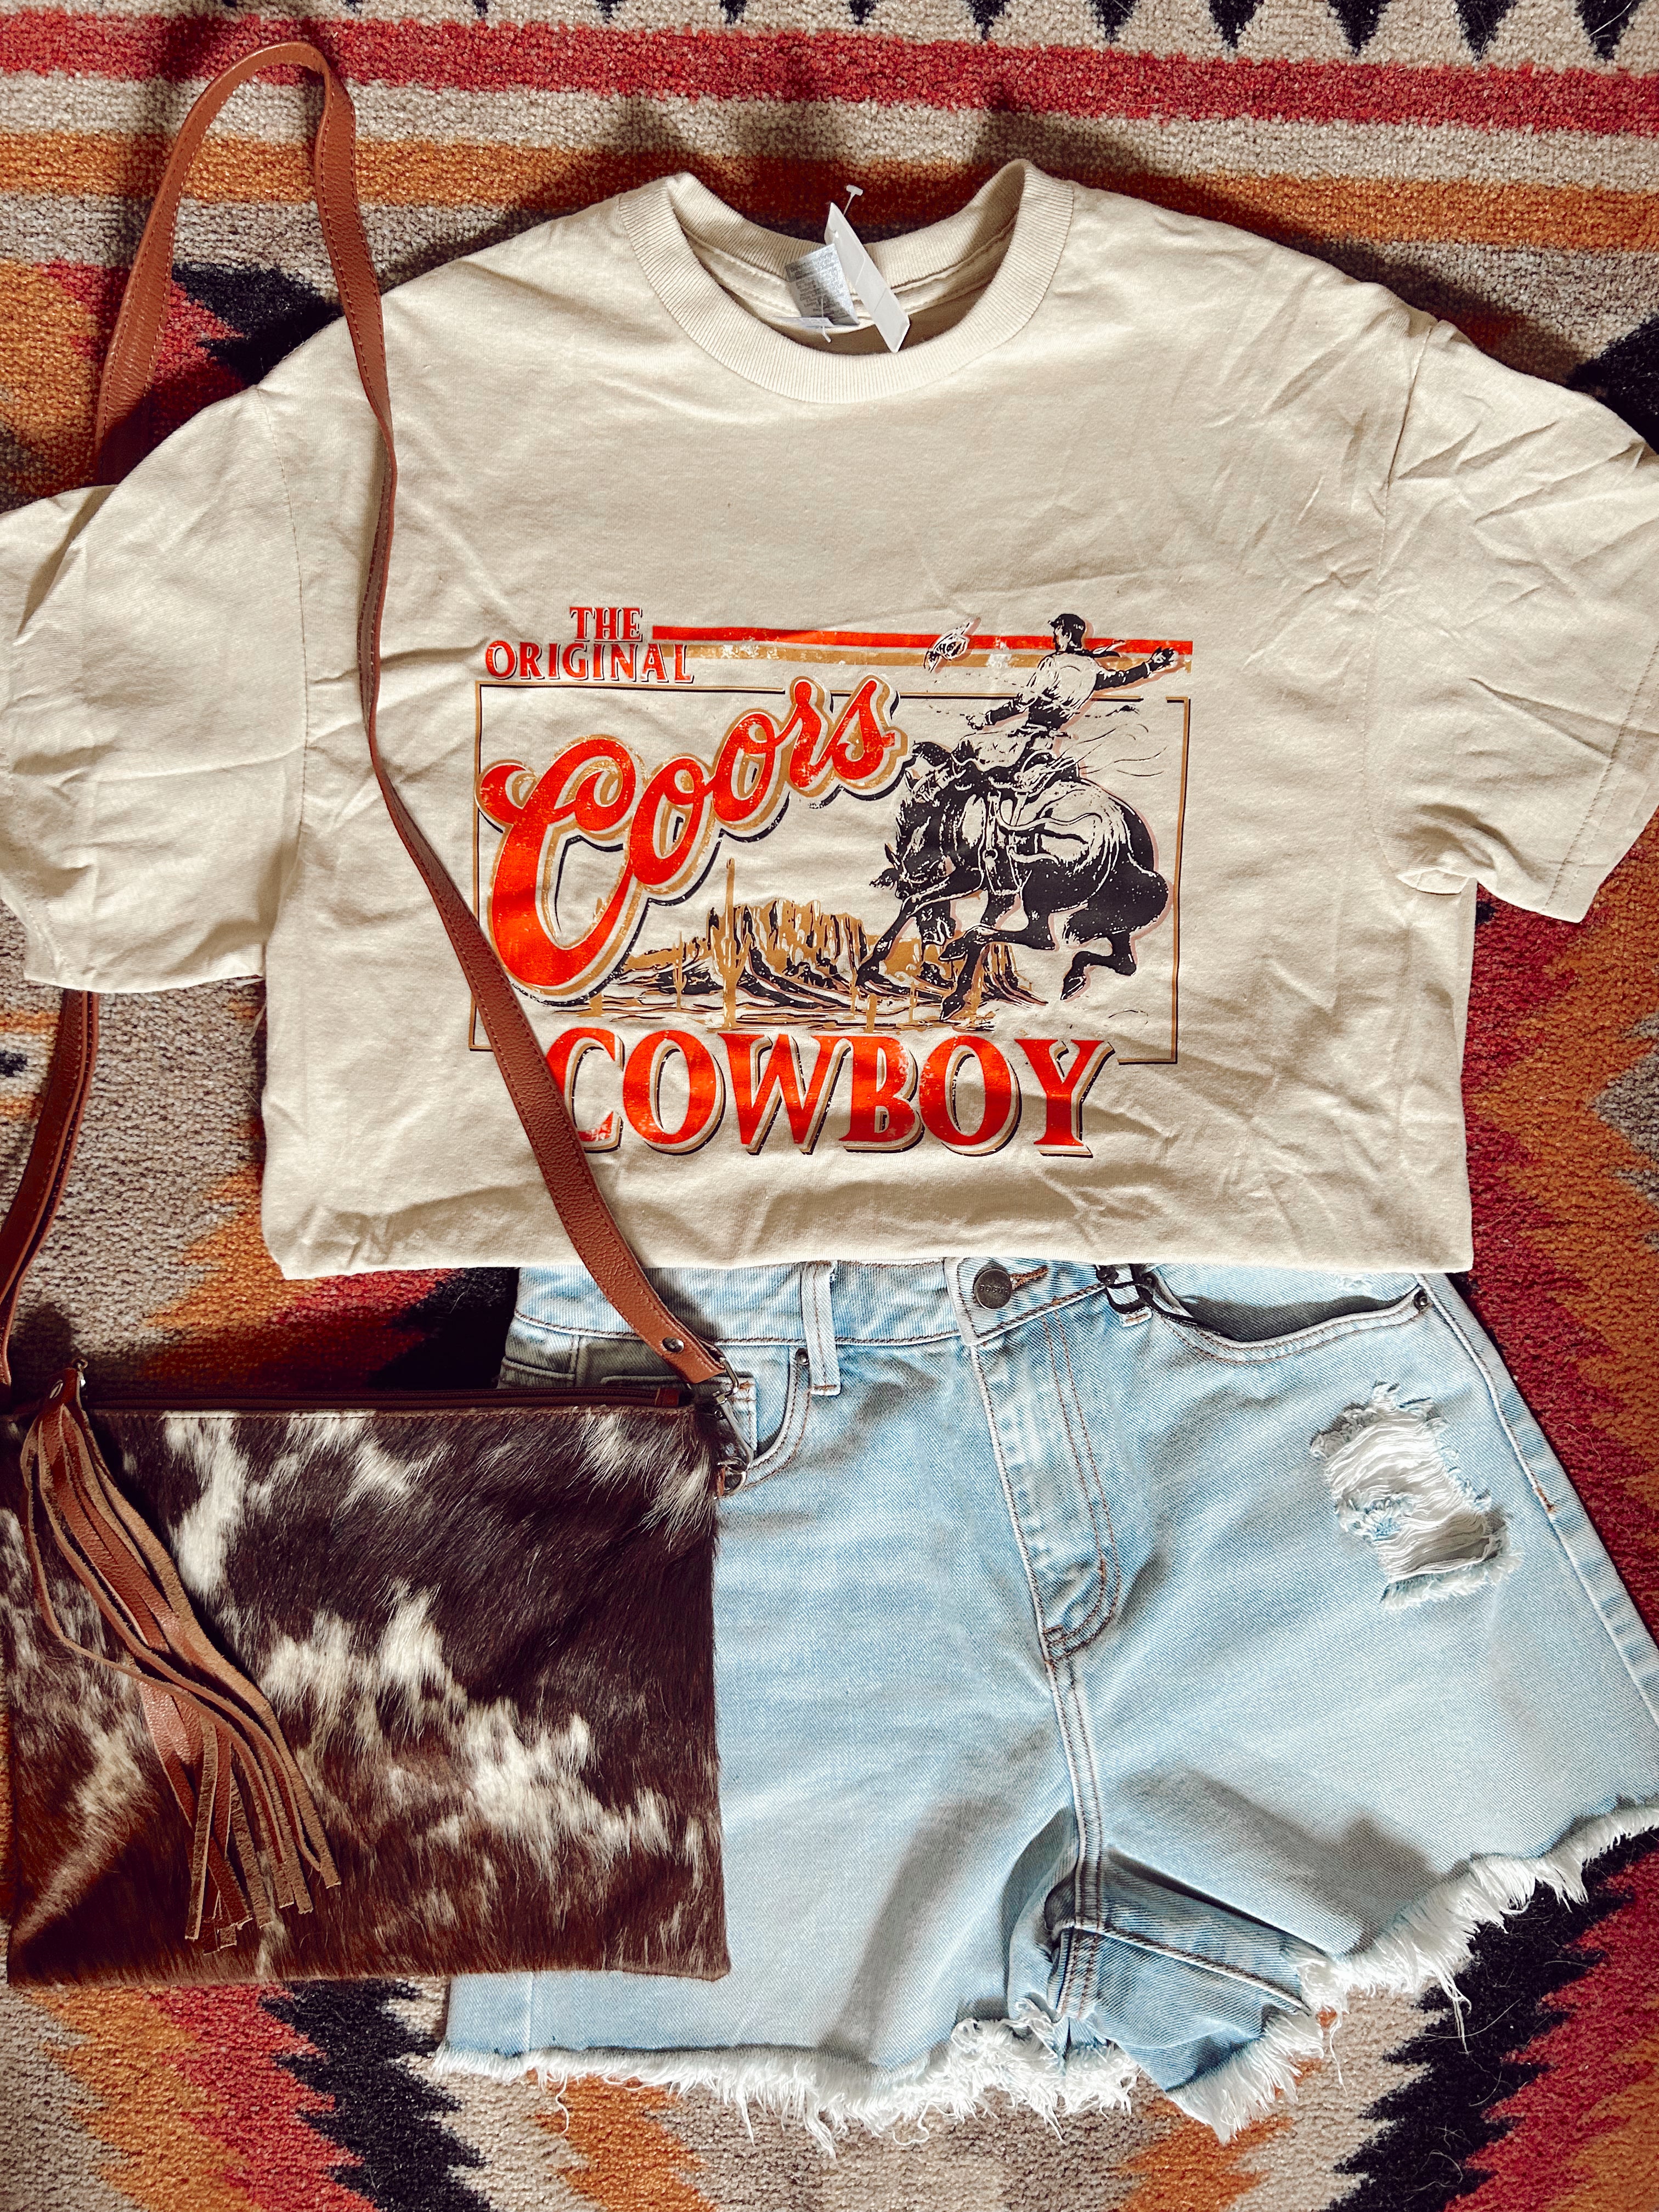 The Coors Cowboy Tee